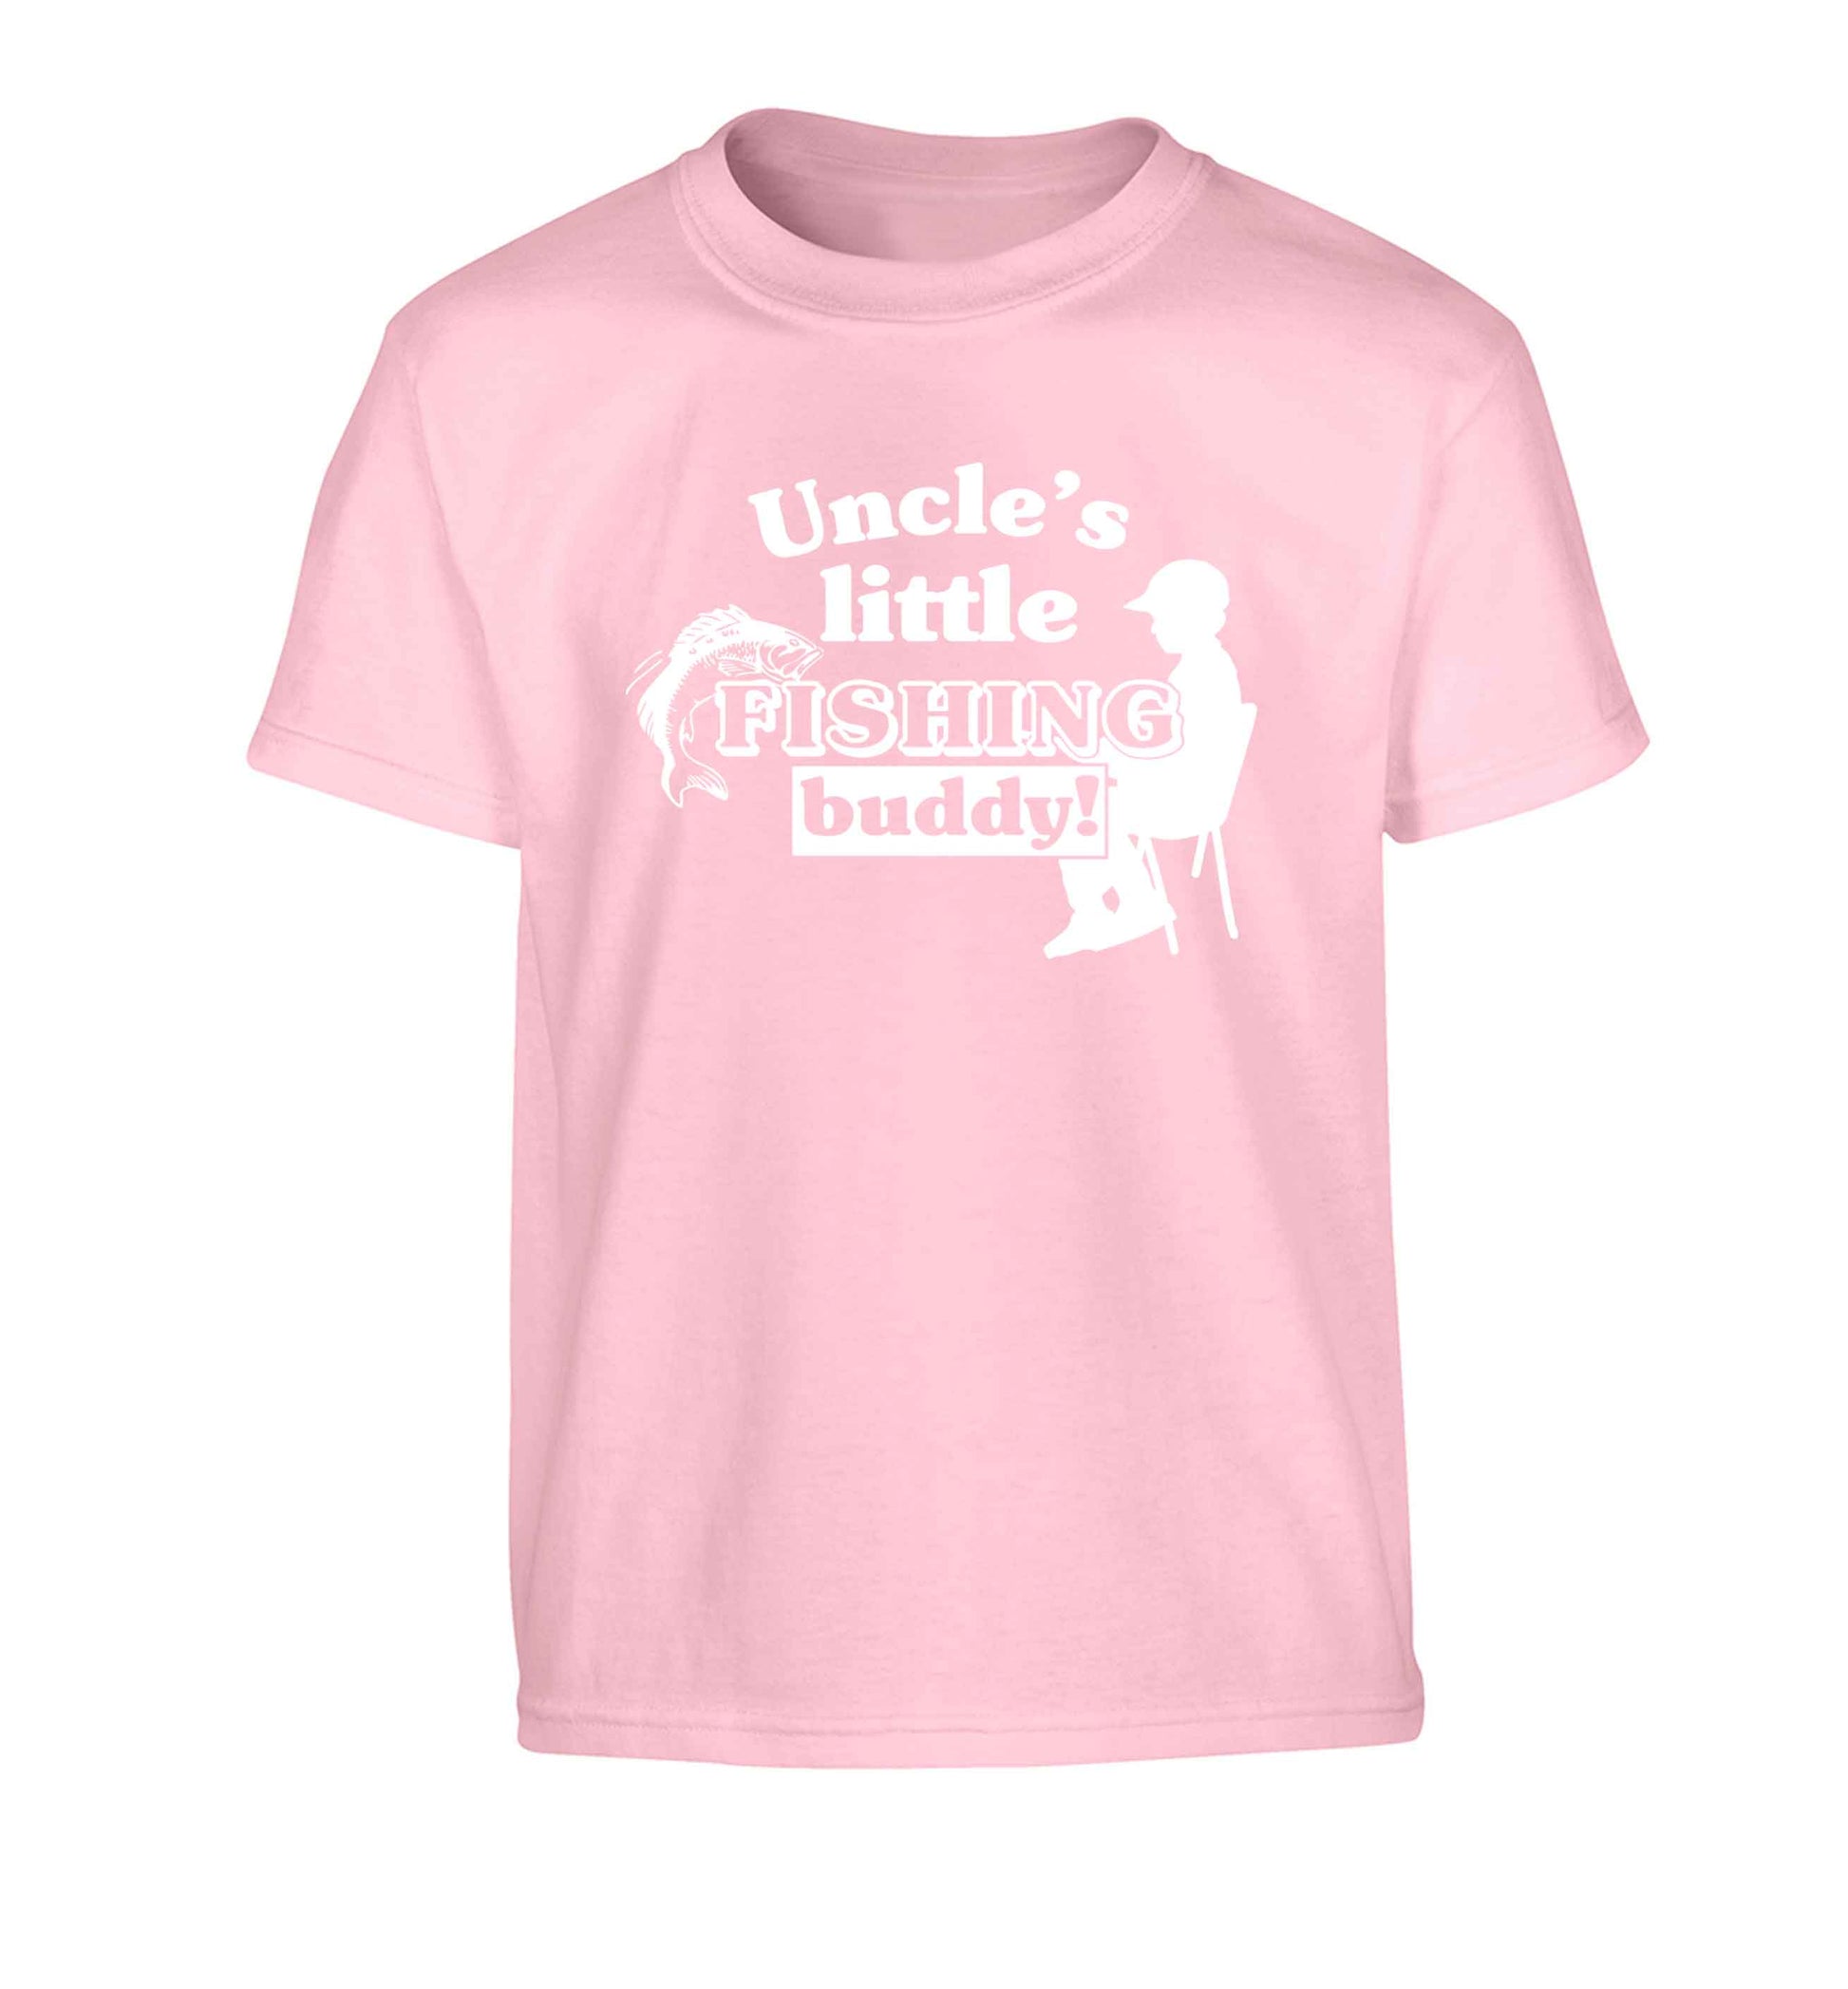 Uncle's little fishing buddy Children's light pink Tshirt 12-13 Years